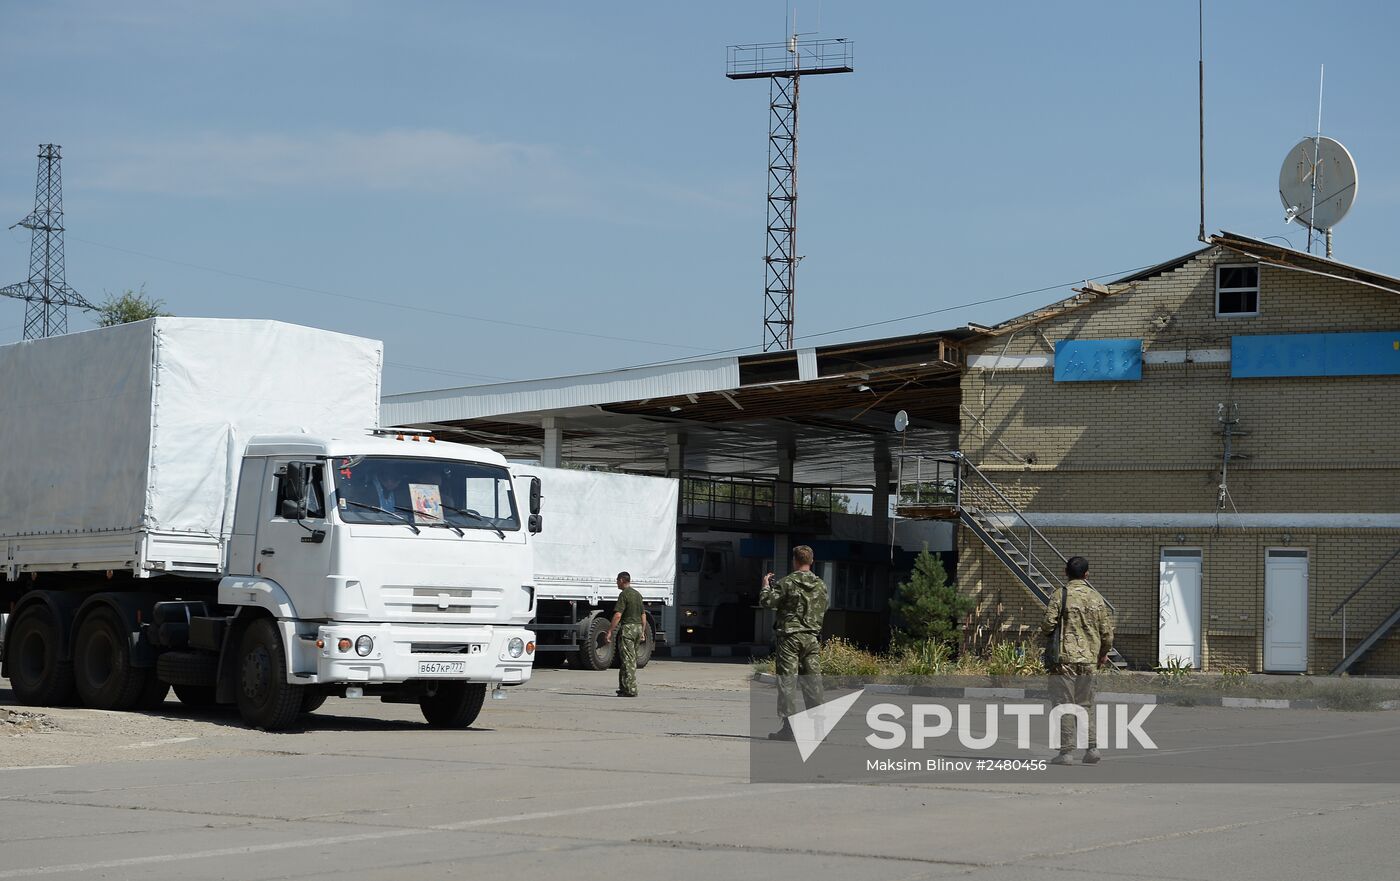 Russia's humanitarian aid convoy leaves Izvarino border crossing point, moves to Lugansk